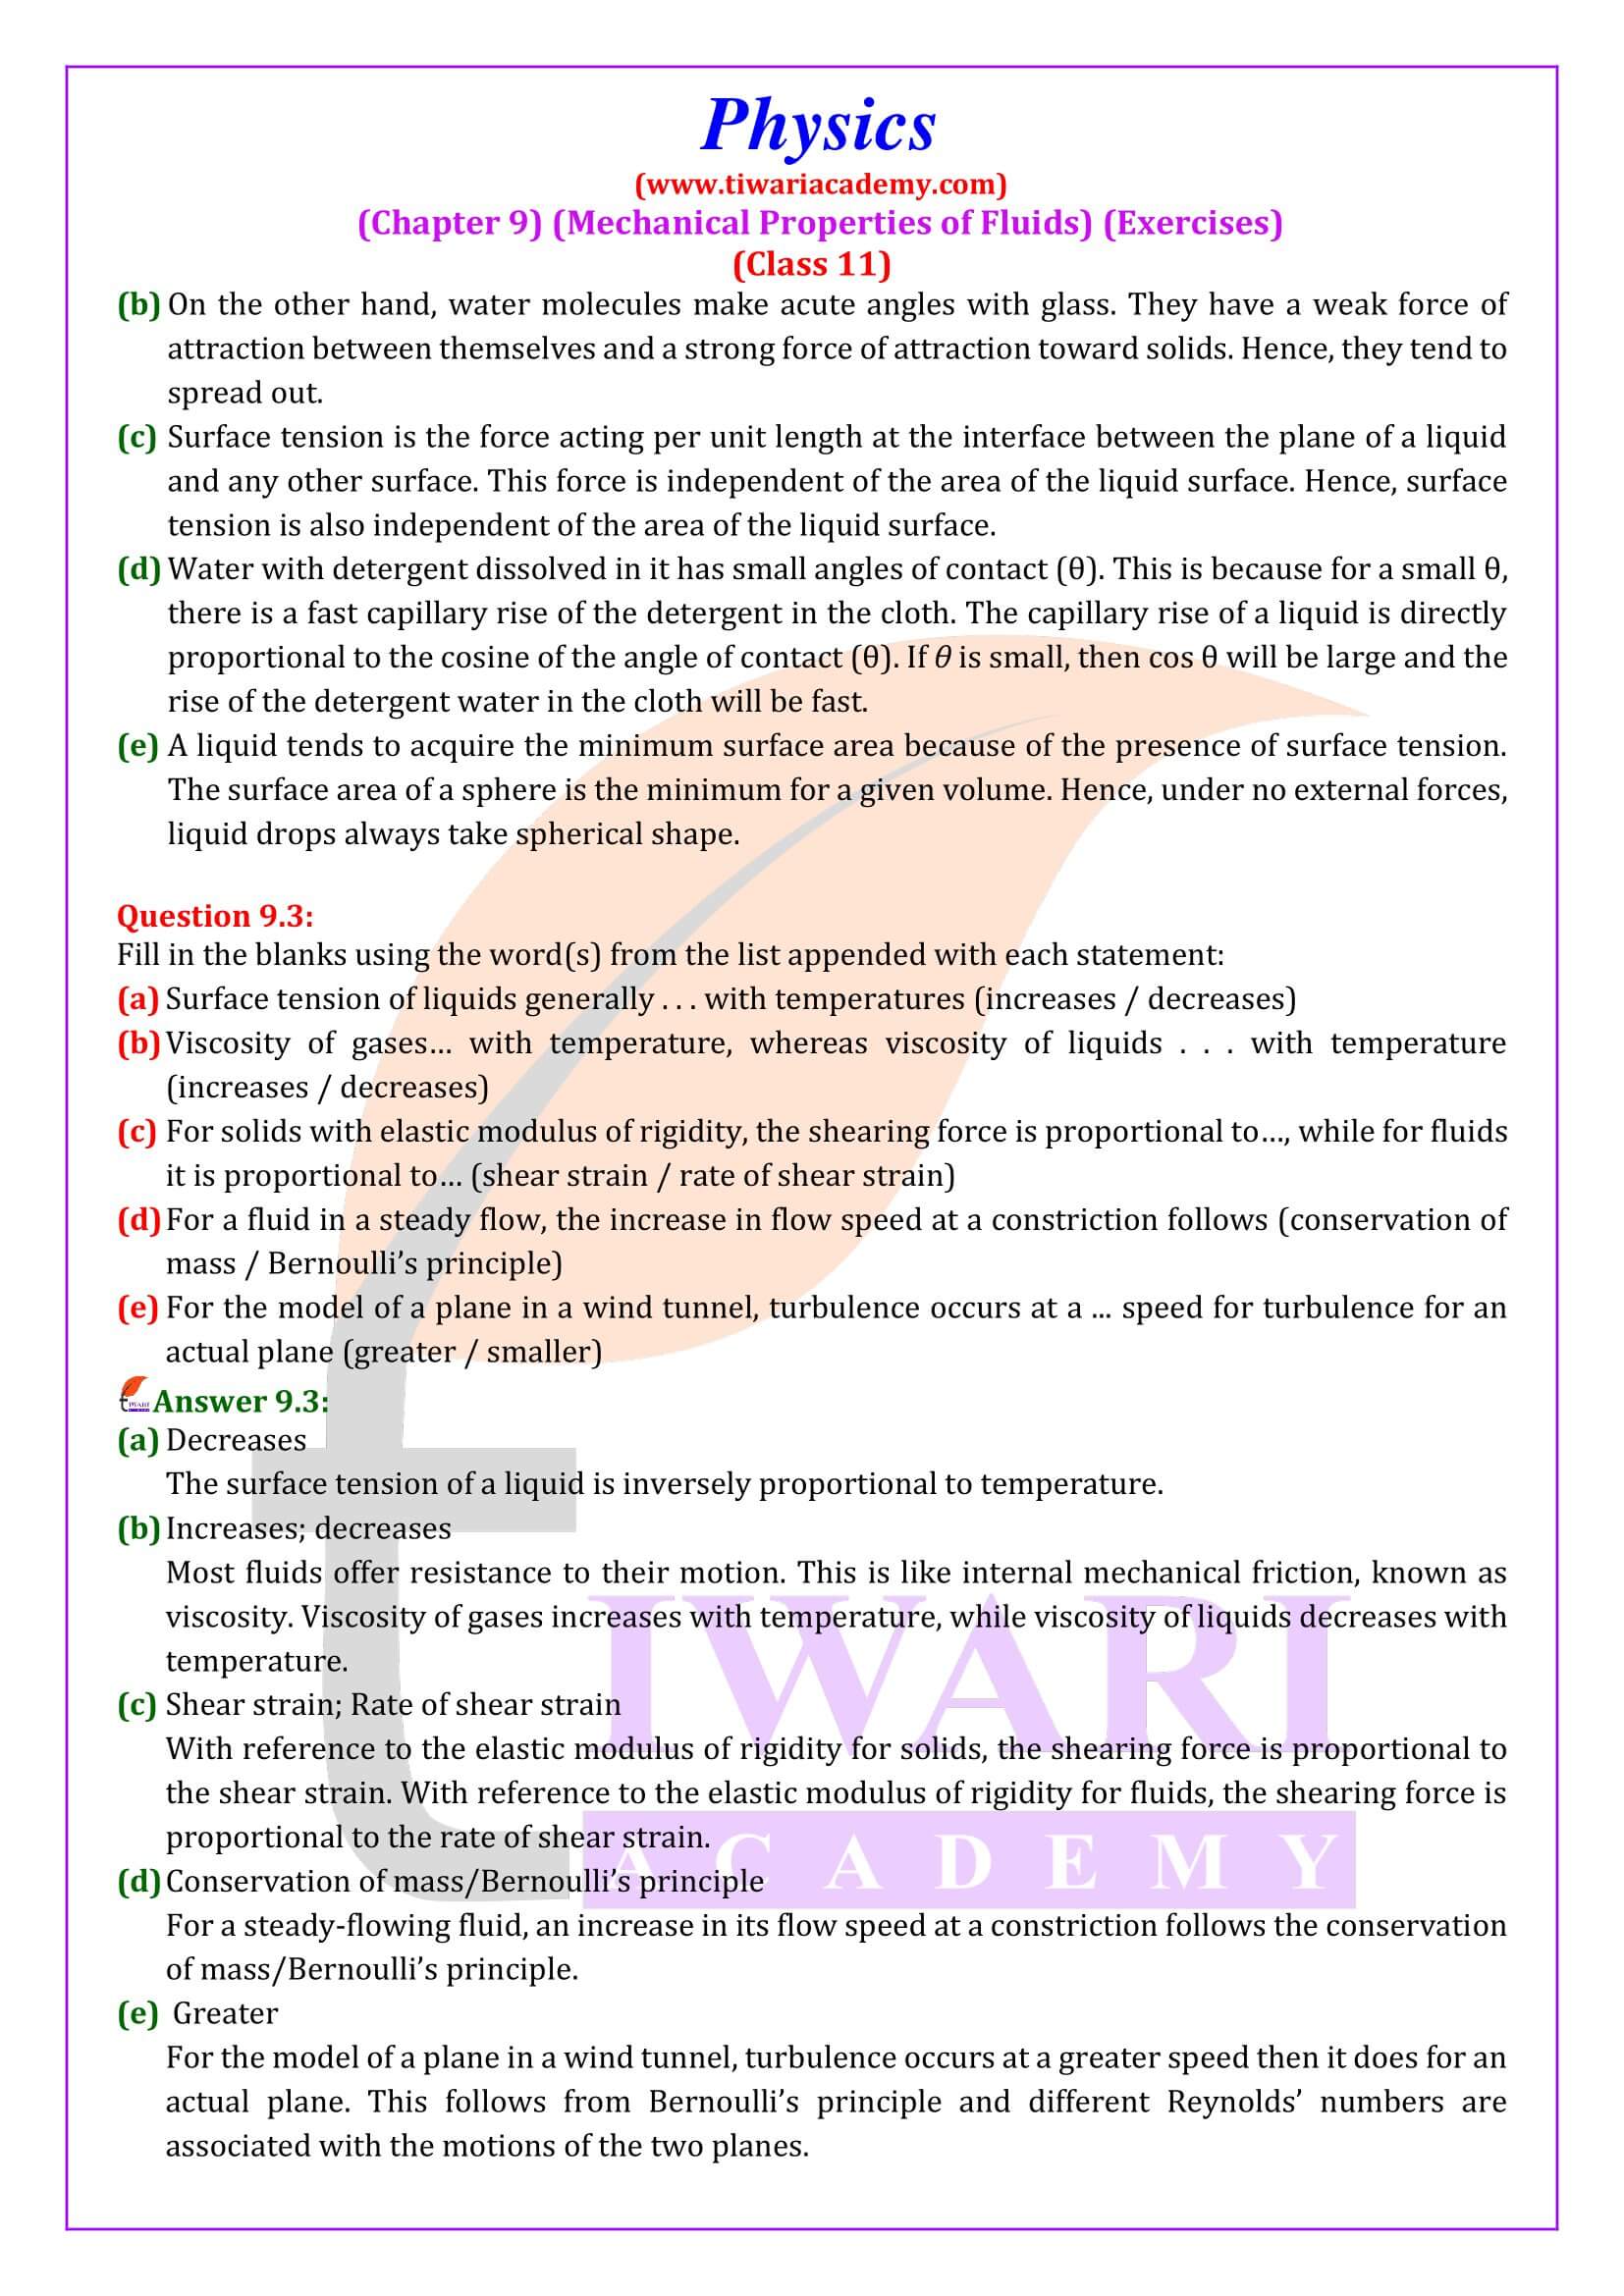 NCERT Solutions for Class 11 Physics Chapter 9